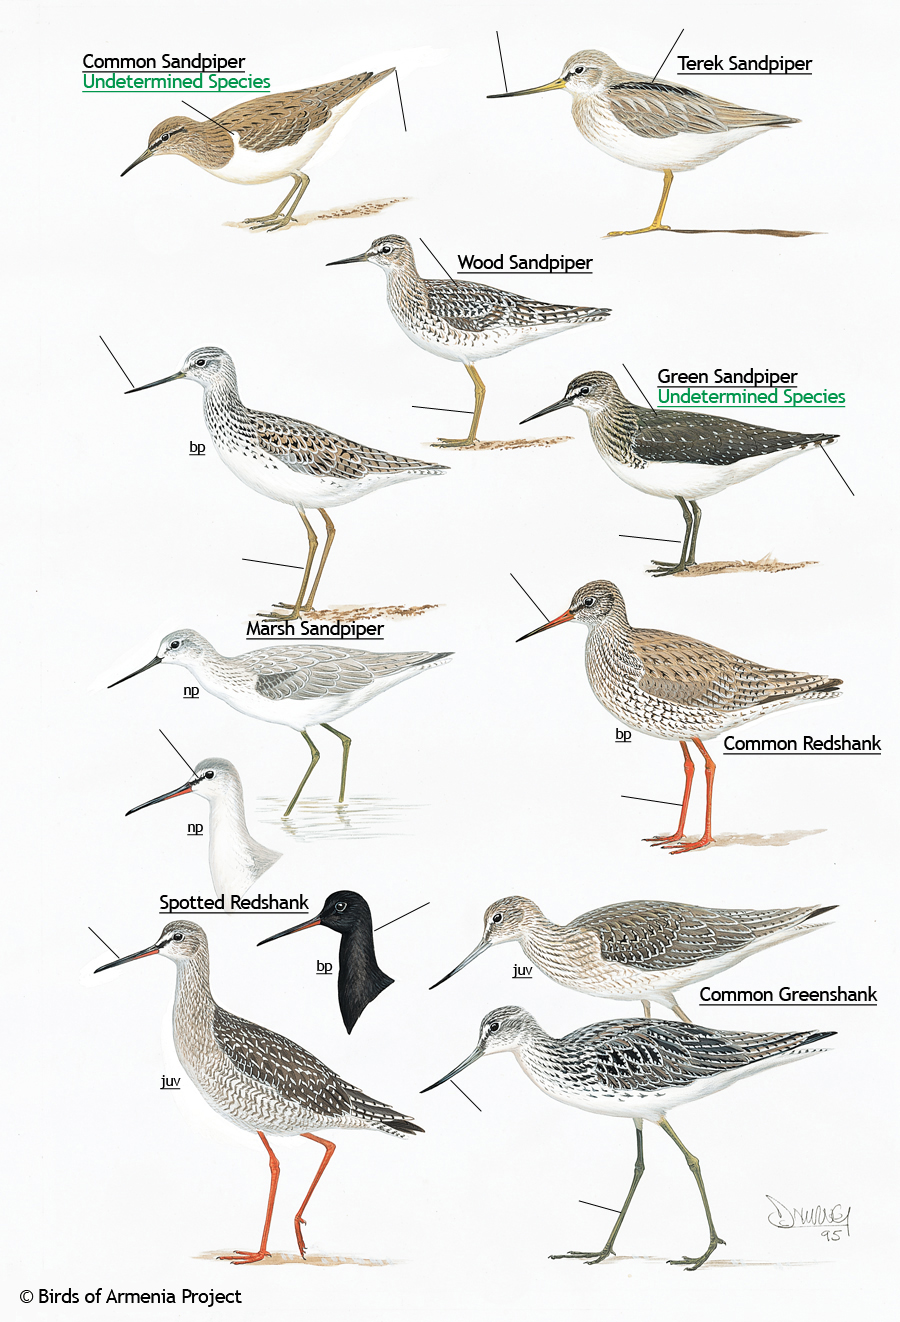 Sandpipers, redshanks and greenshanks